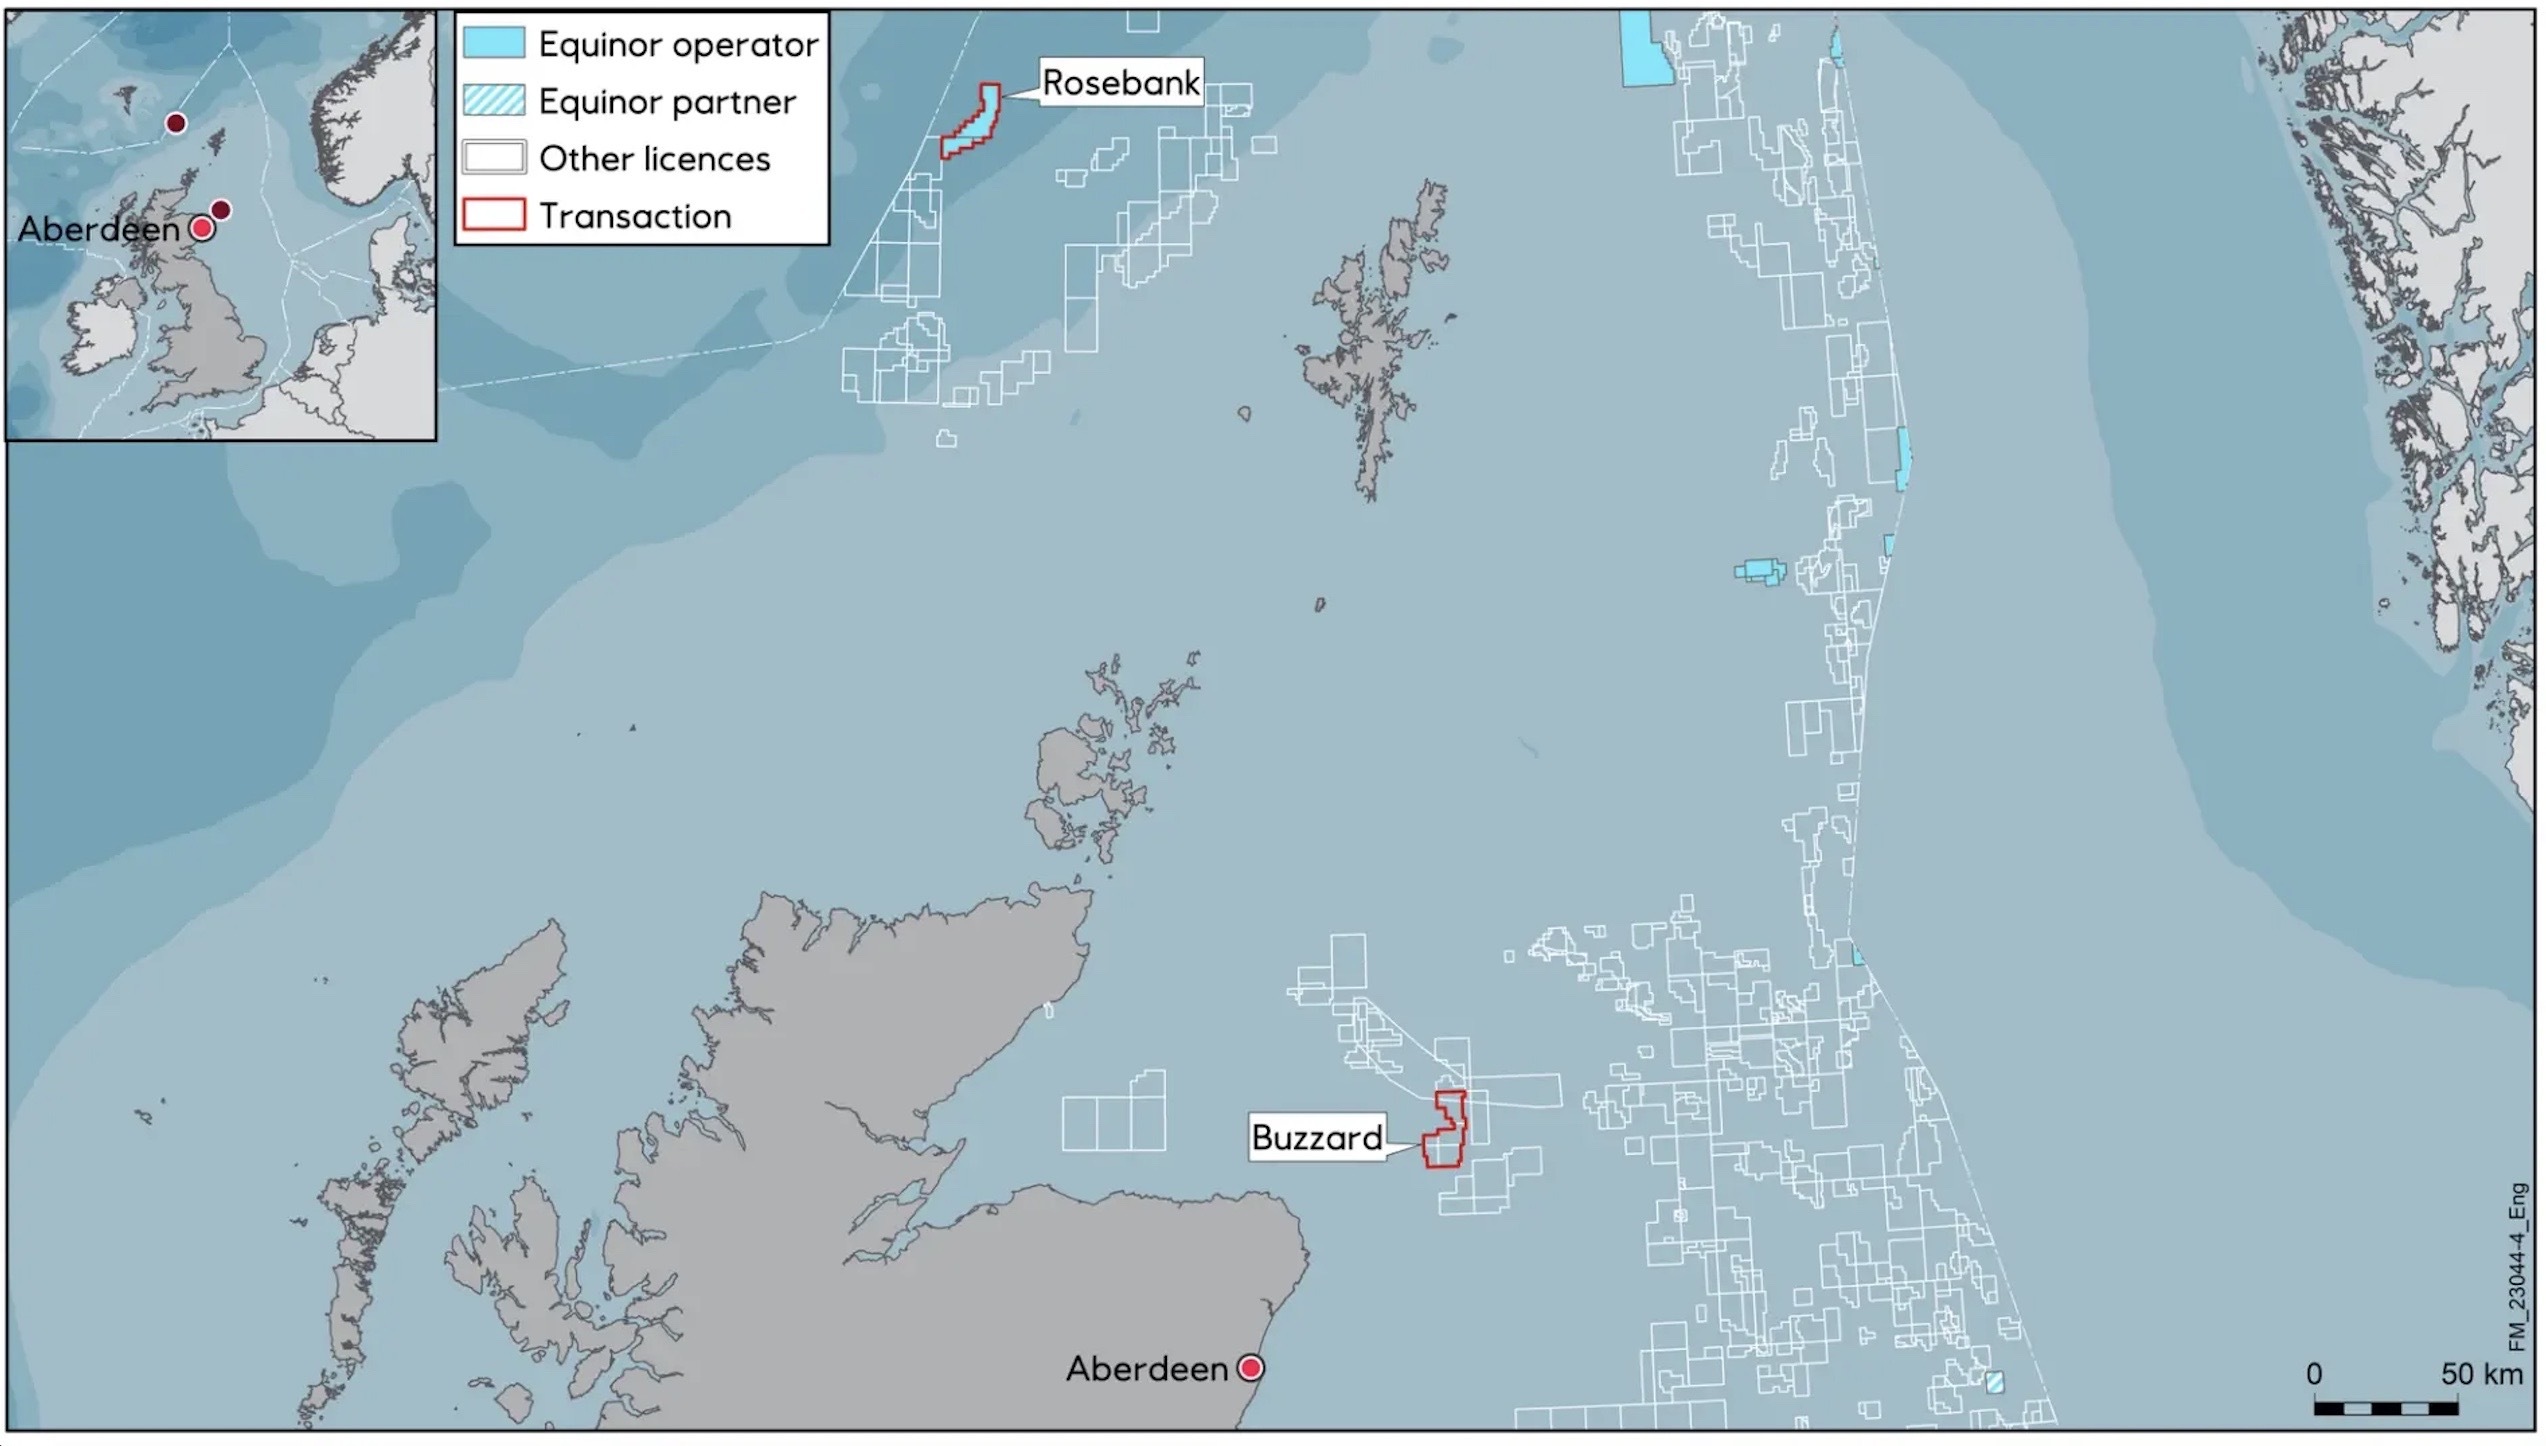 Equinor acquires North Sea assets in $850 million Suncor Energy deal